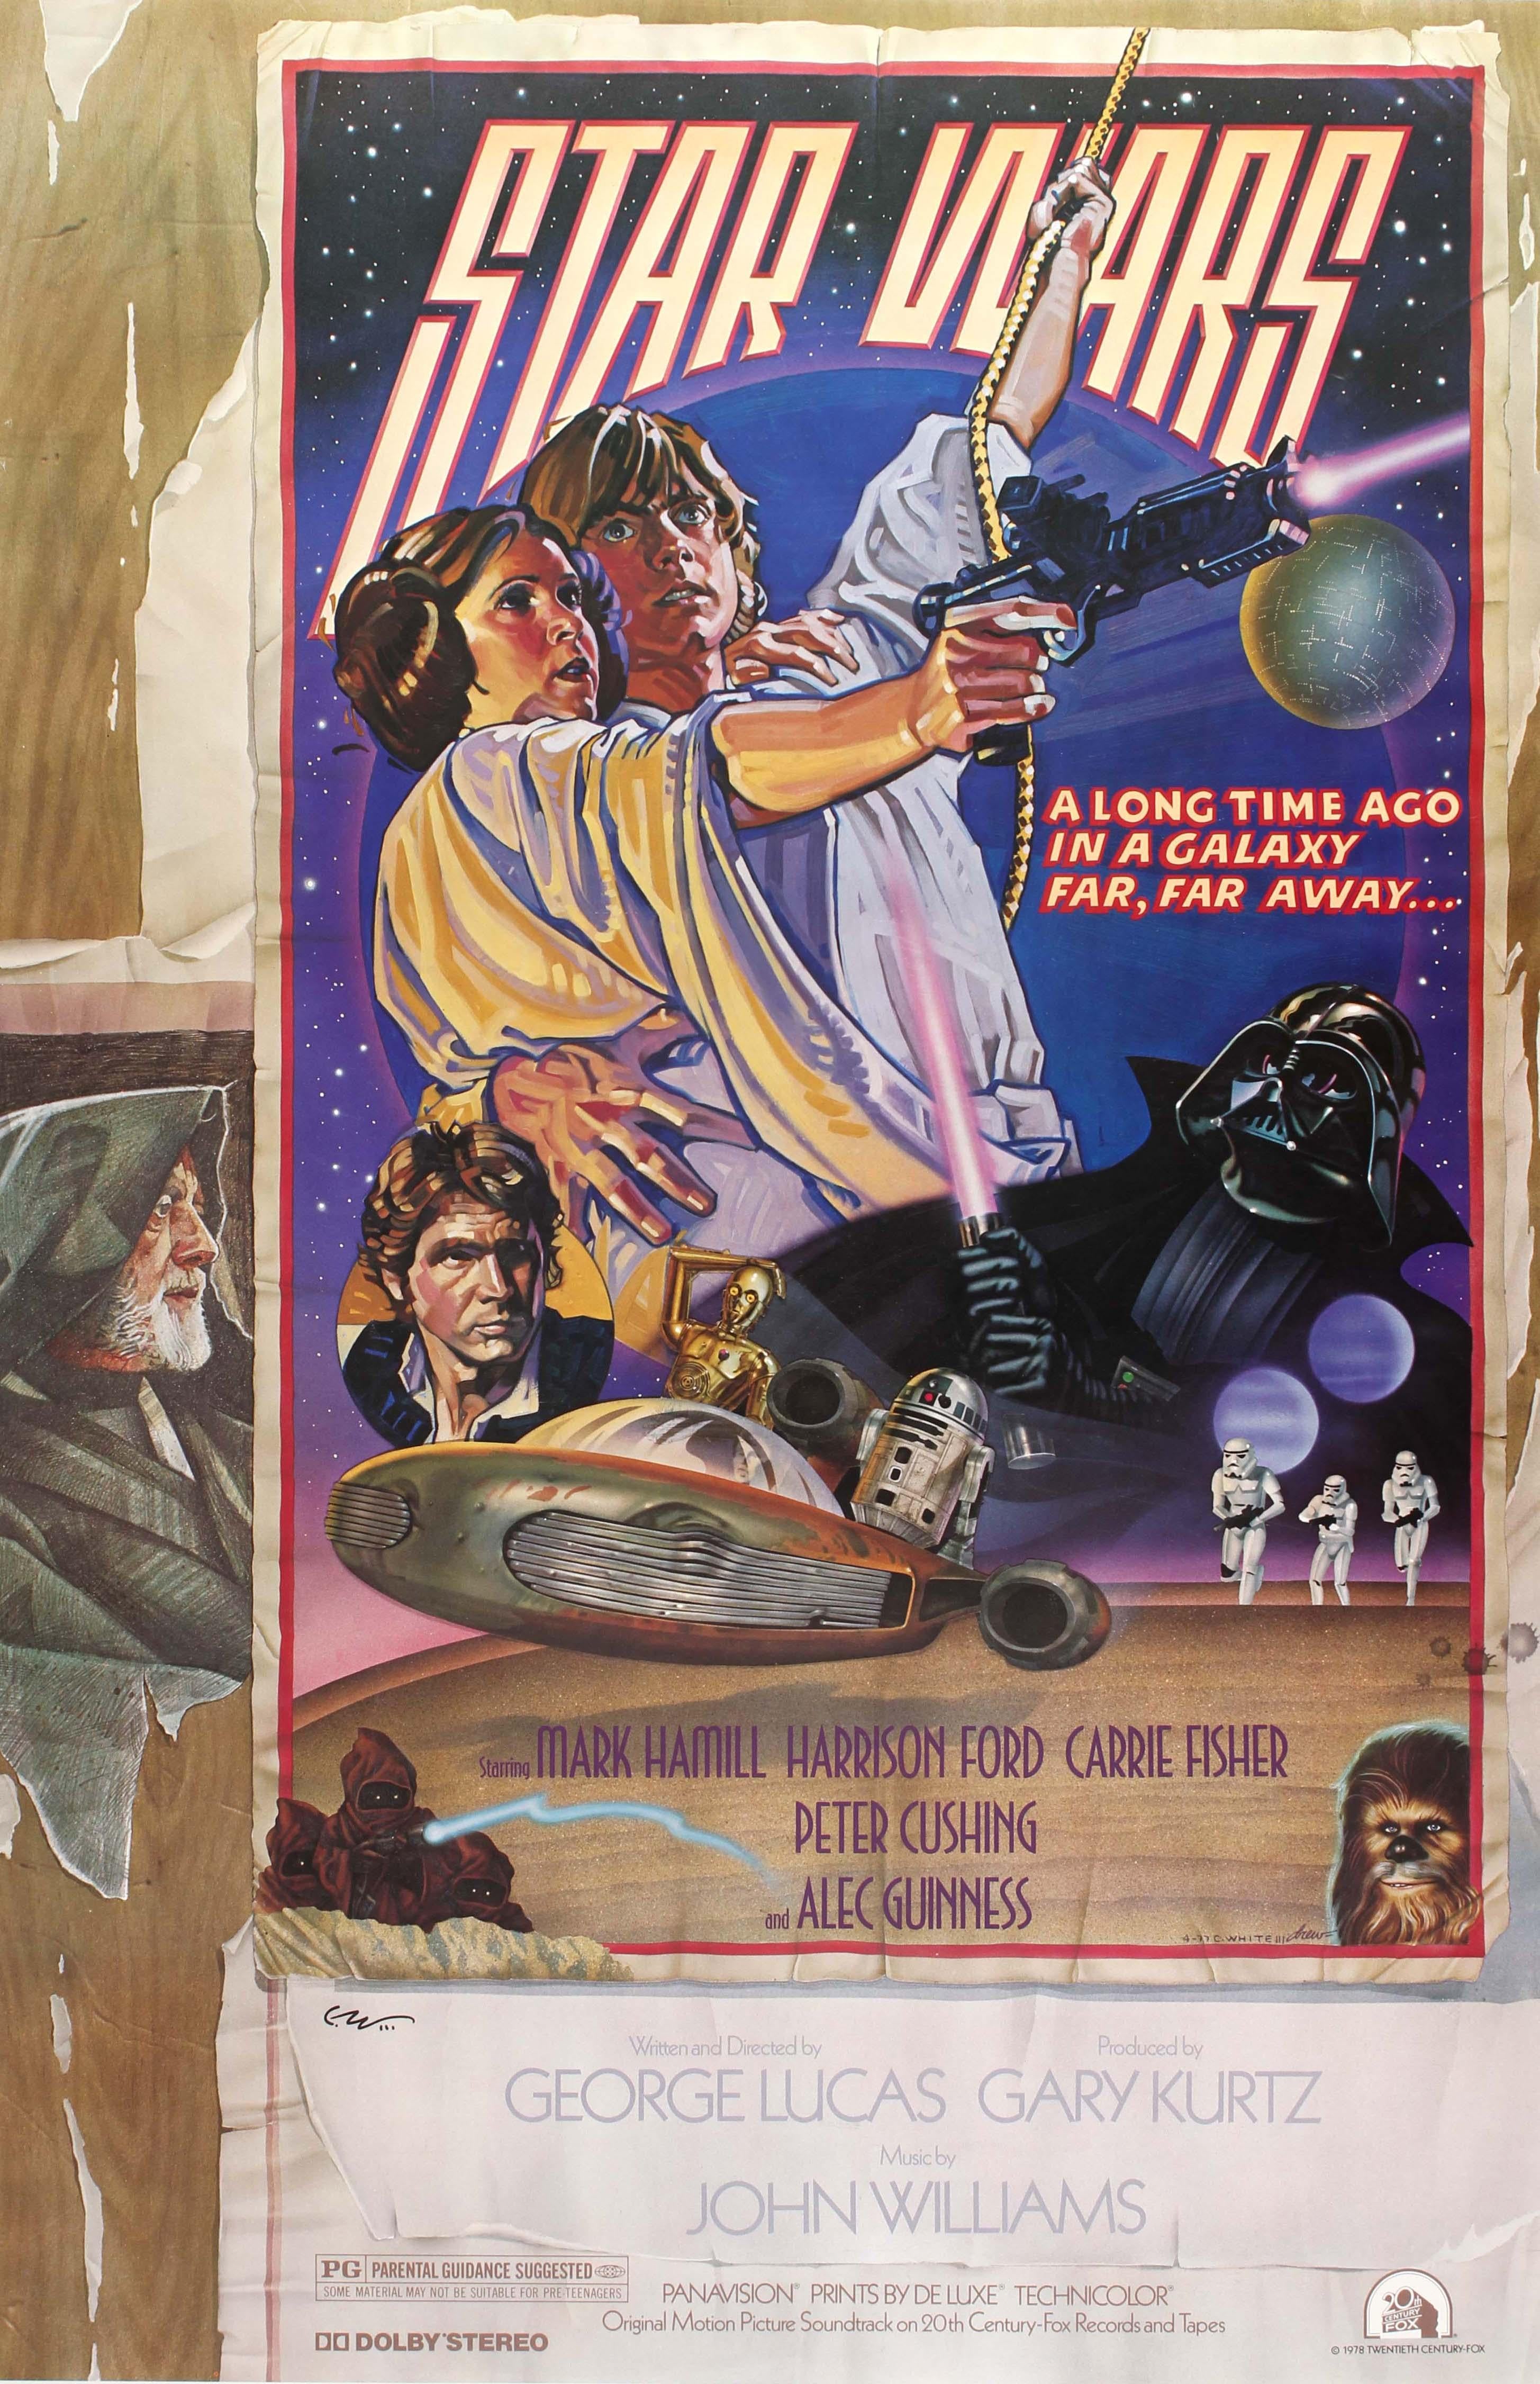 Original vintage movie poster for the classic film directed by George Lucas - Star Wars: Episode IV A New Hope - starring Mark Hamill as Luke Skywalker, Harrison Ford as Han Solo, Peter Mayhew as Chewbacca, Carrie Fisher as Princess Leia, Alec